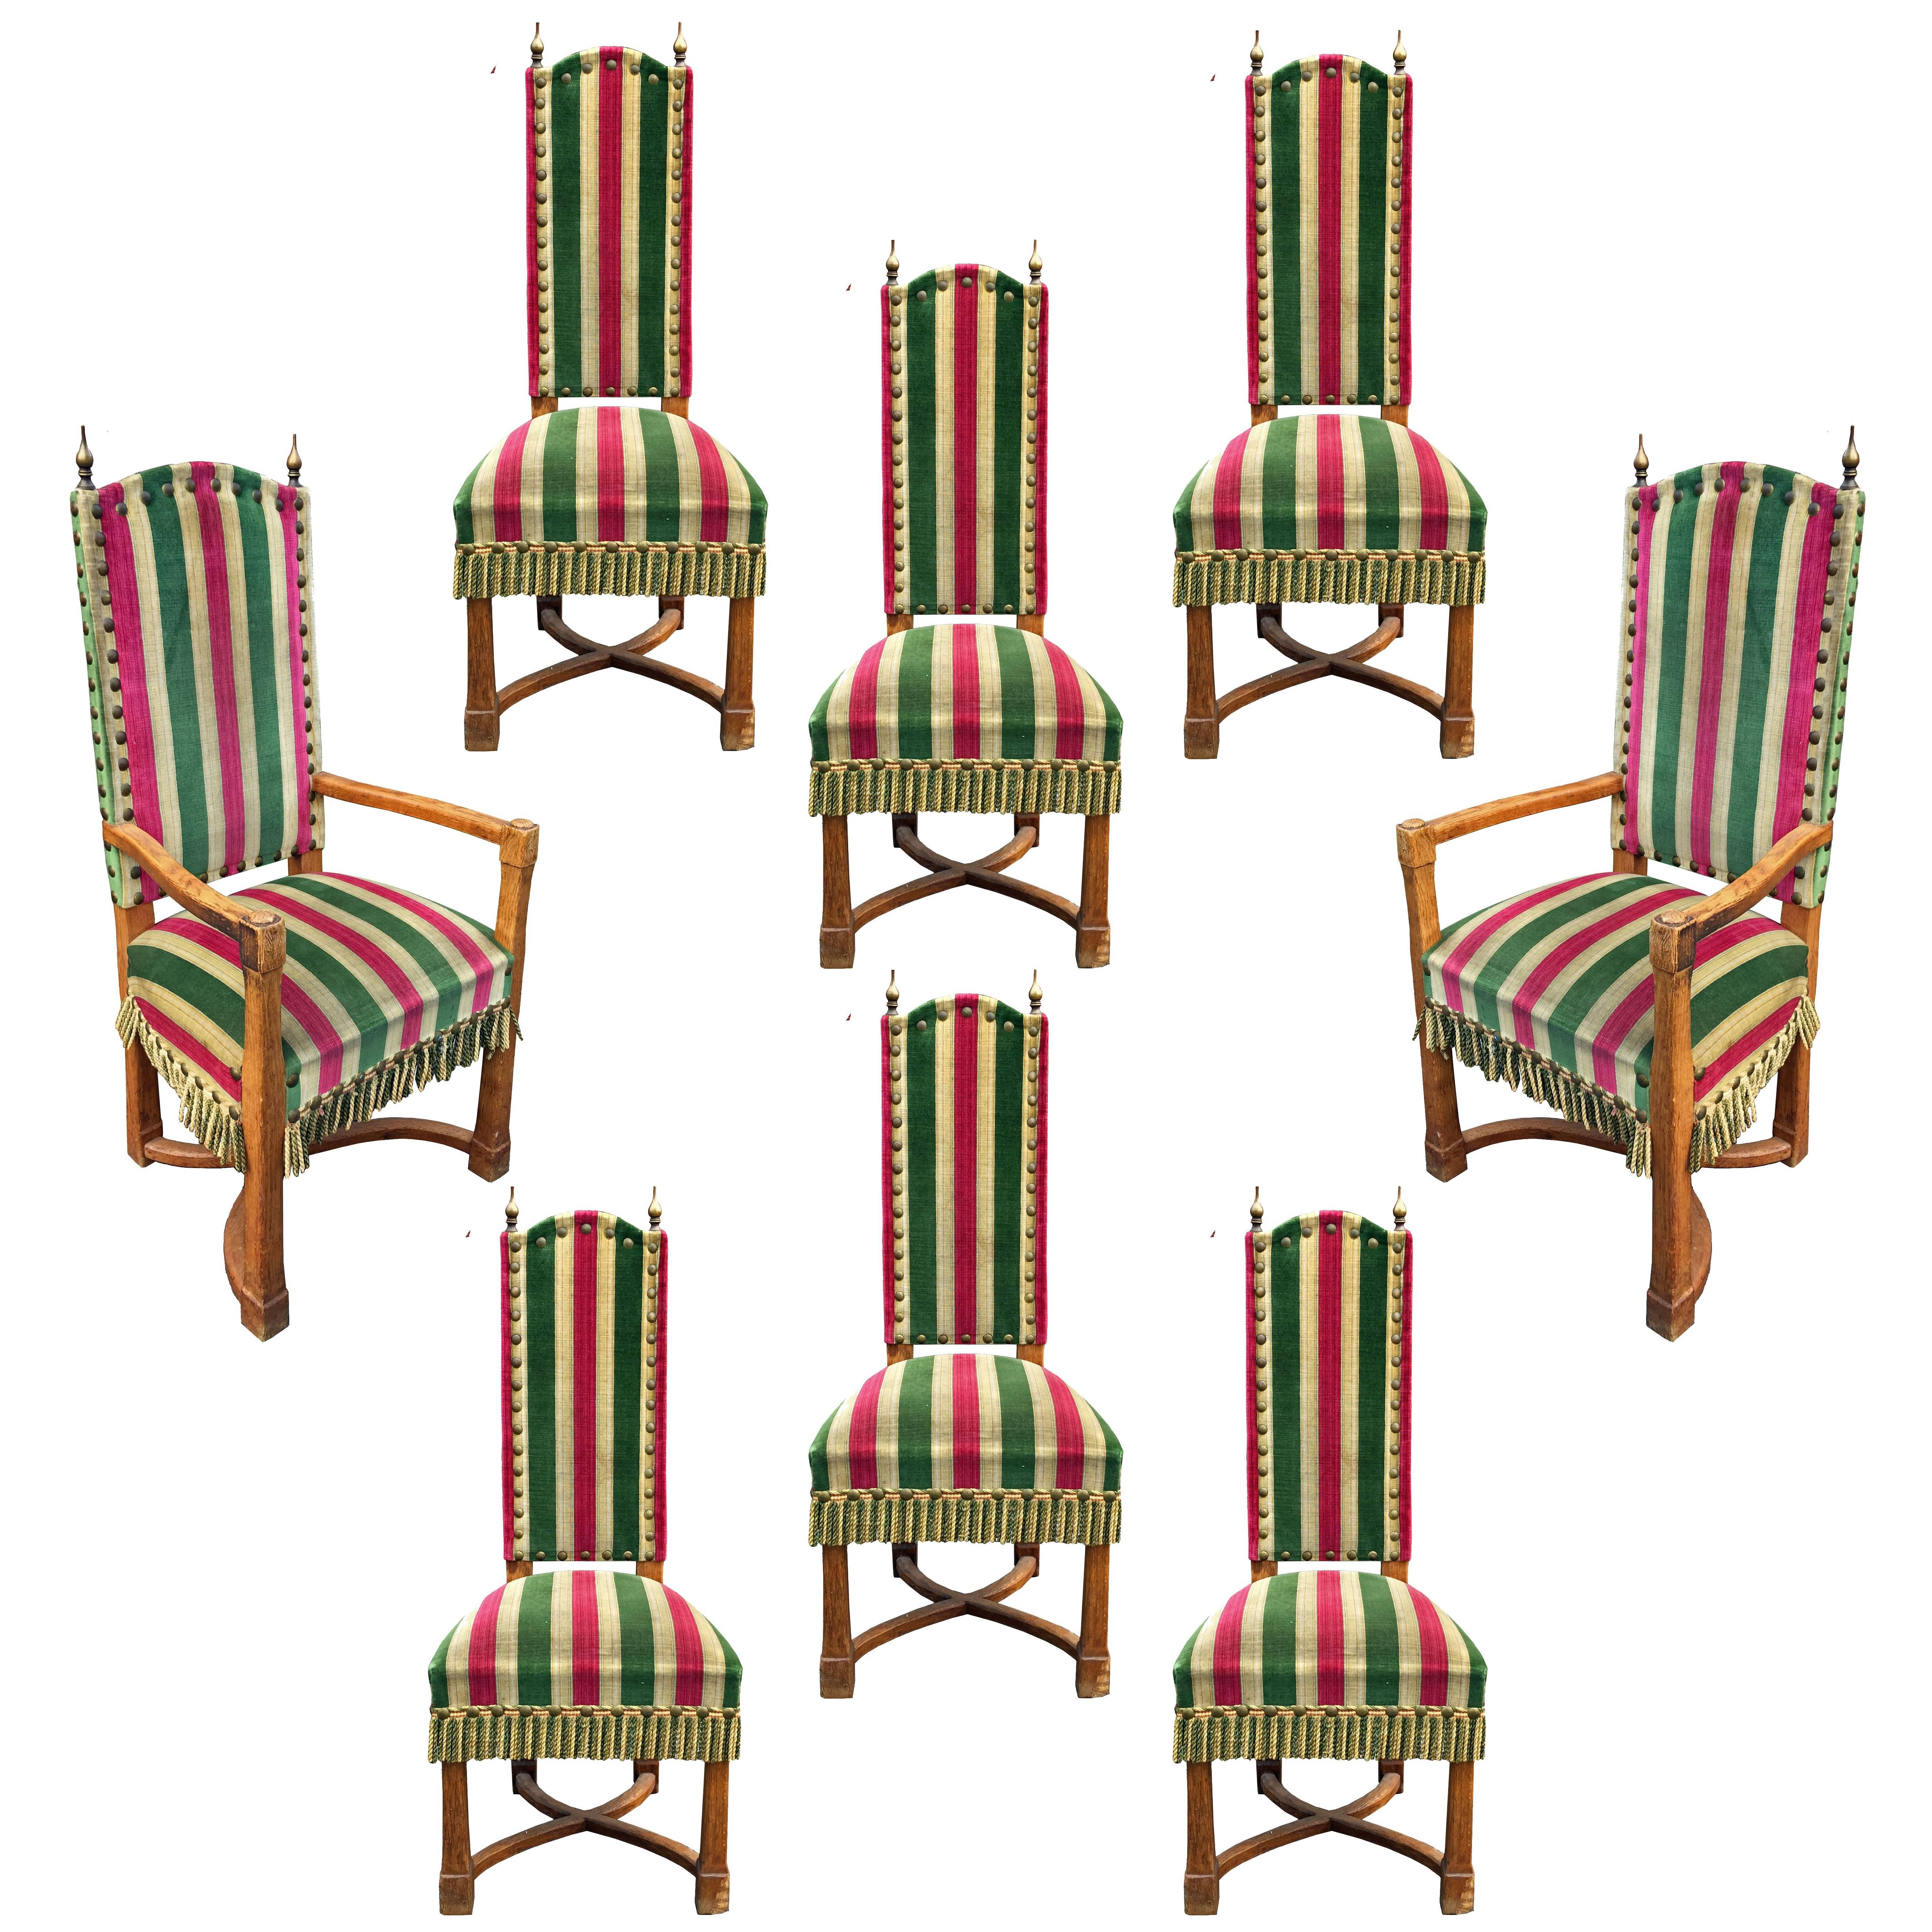 Set of Eight Brutalist Chairs in Oak, Brass and Velvet, circa 1950